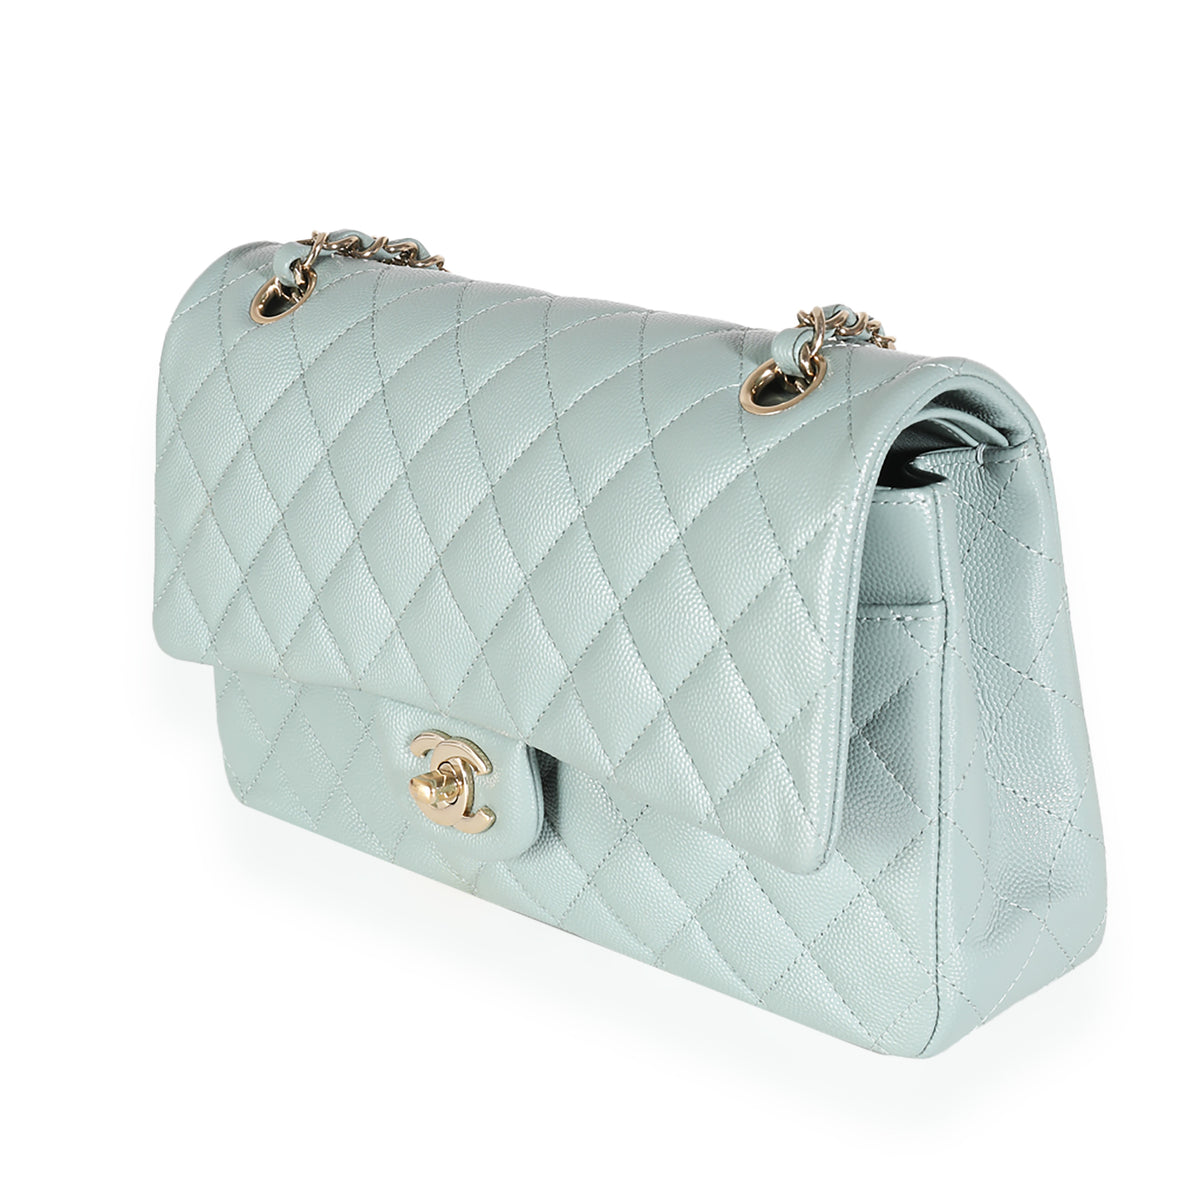 Blue Quilted Caviar Medium Classic Double Flap Bag